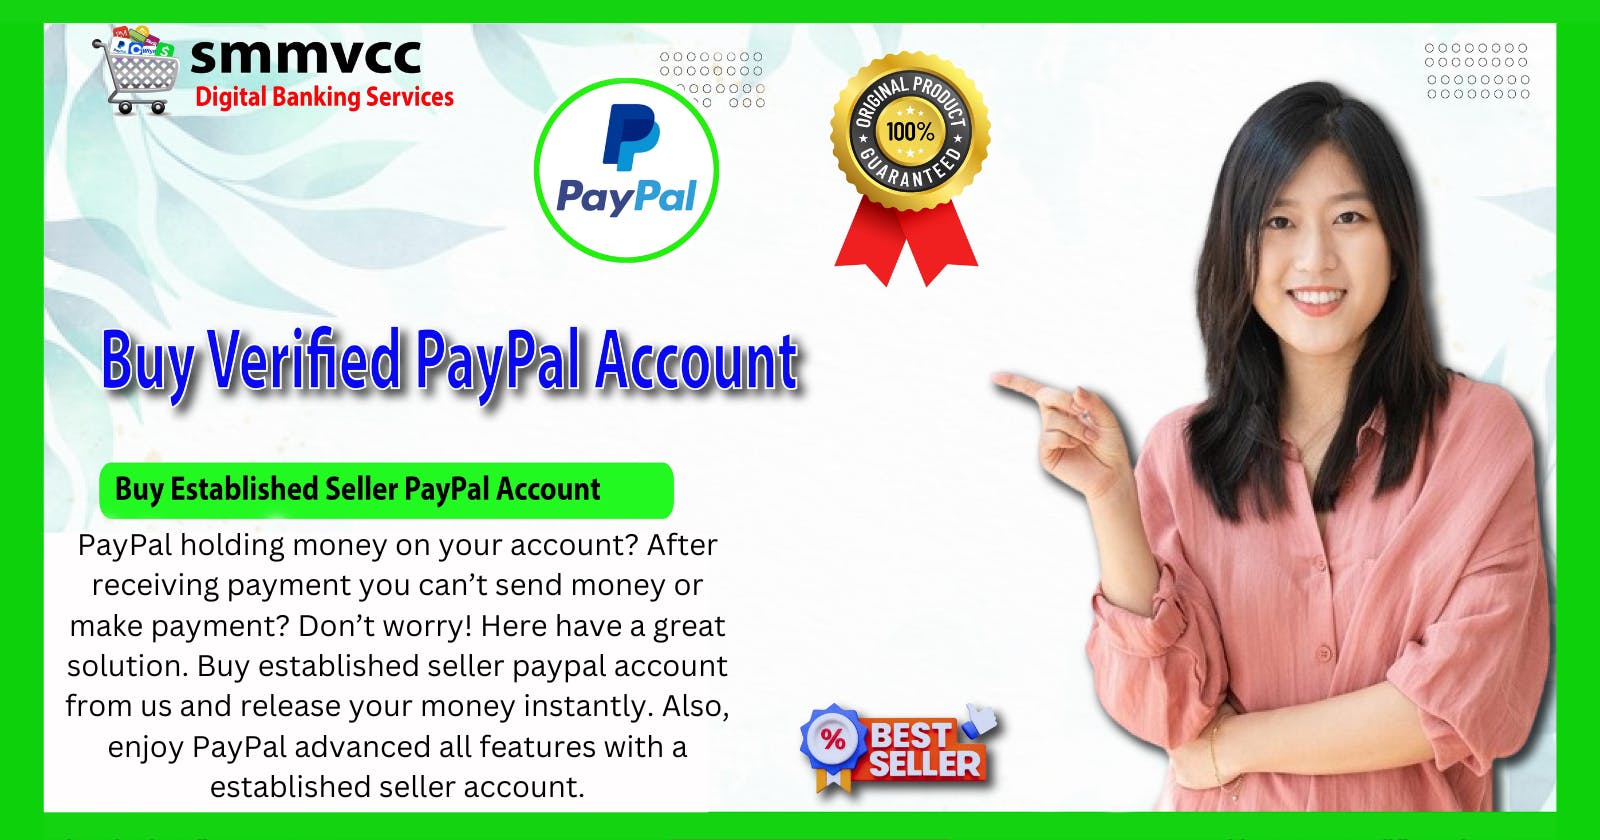 How to Buy a Verified PayPal Account from a Reliable Source